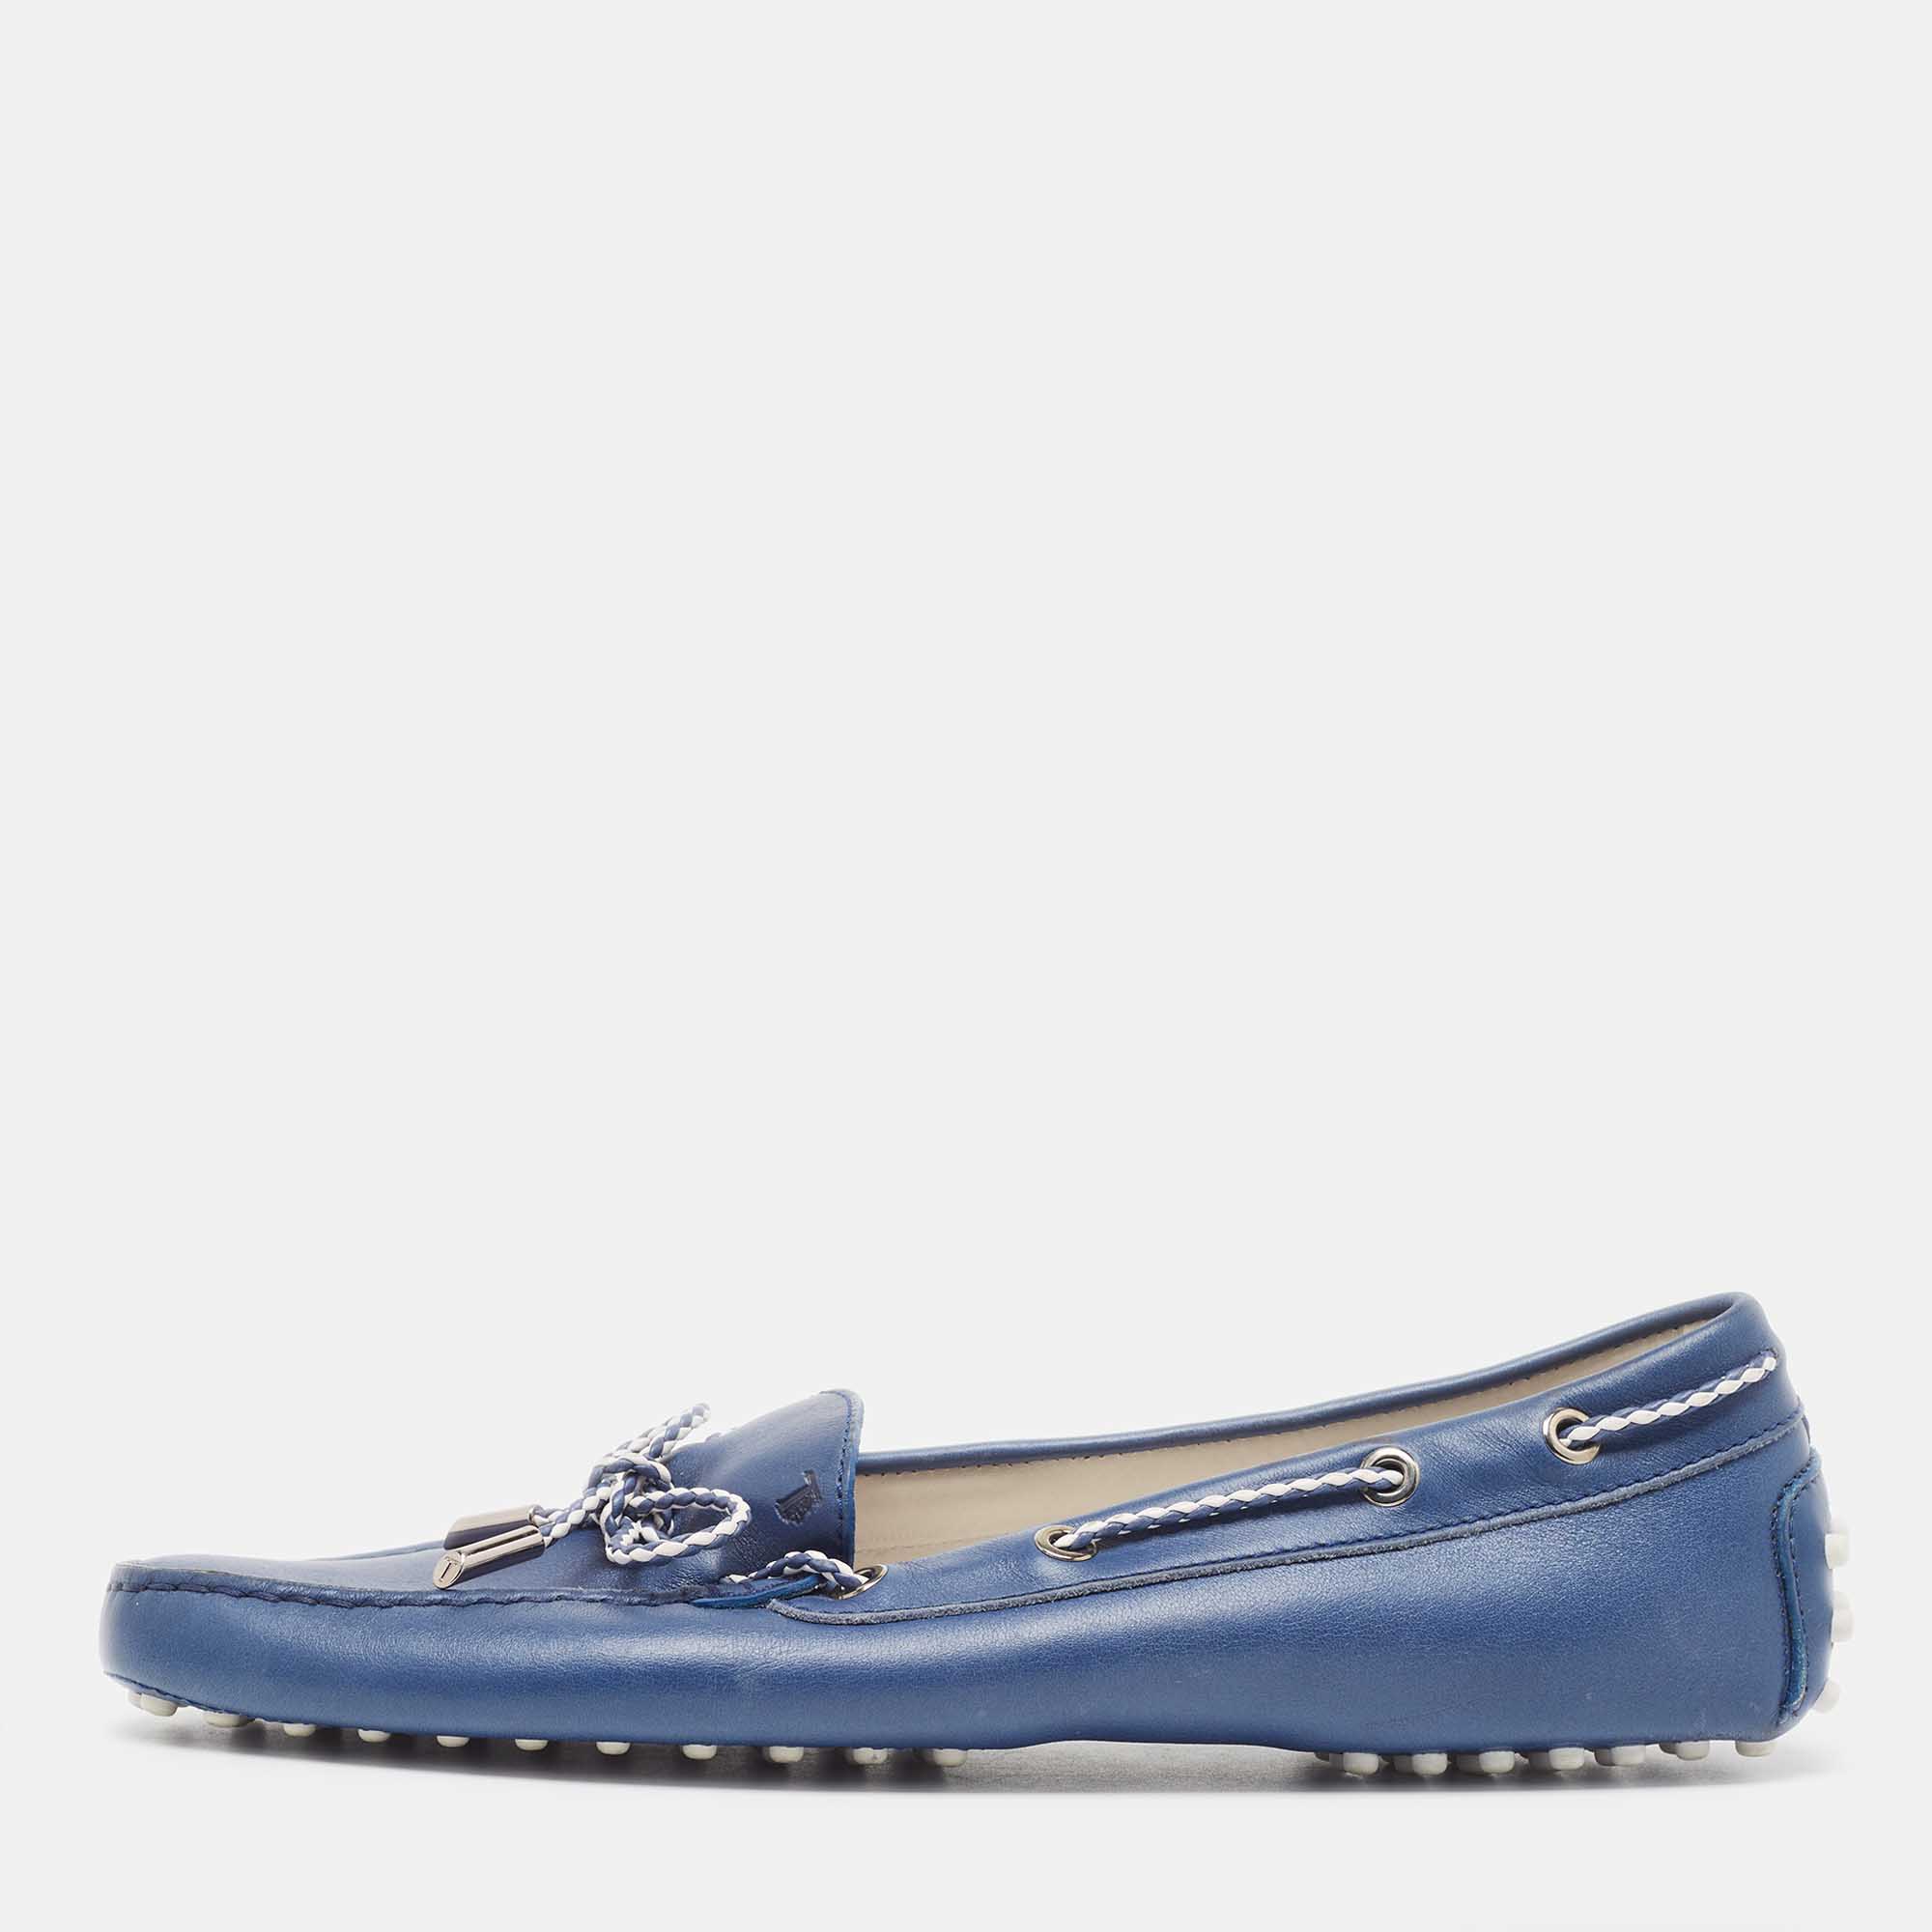 Tod's Blue Leather Bow Slip On Loafers Size 41